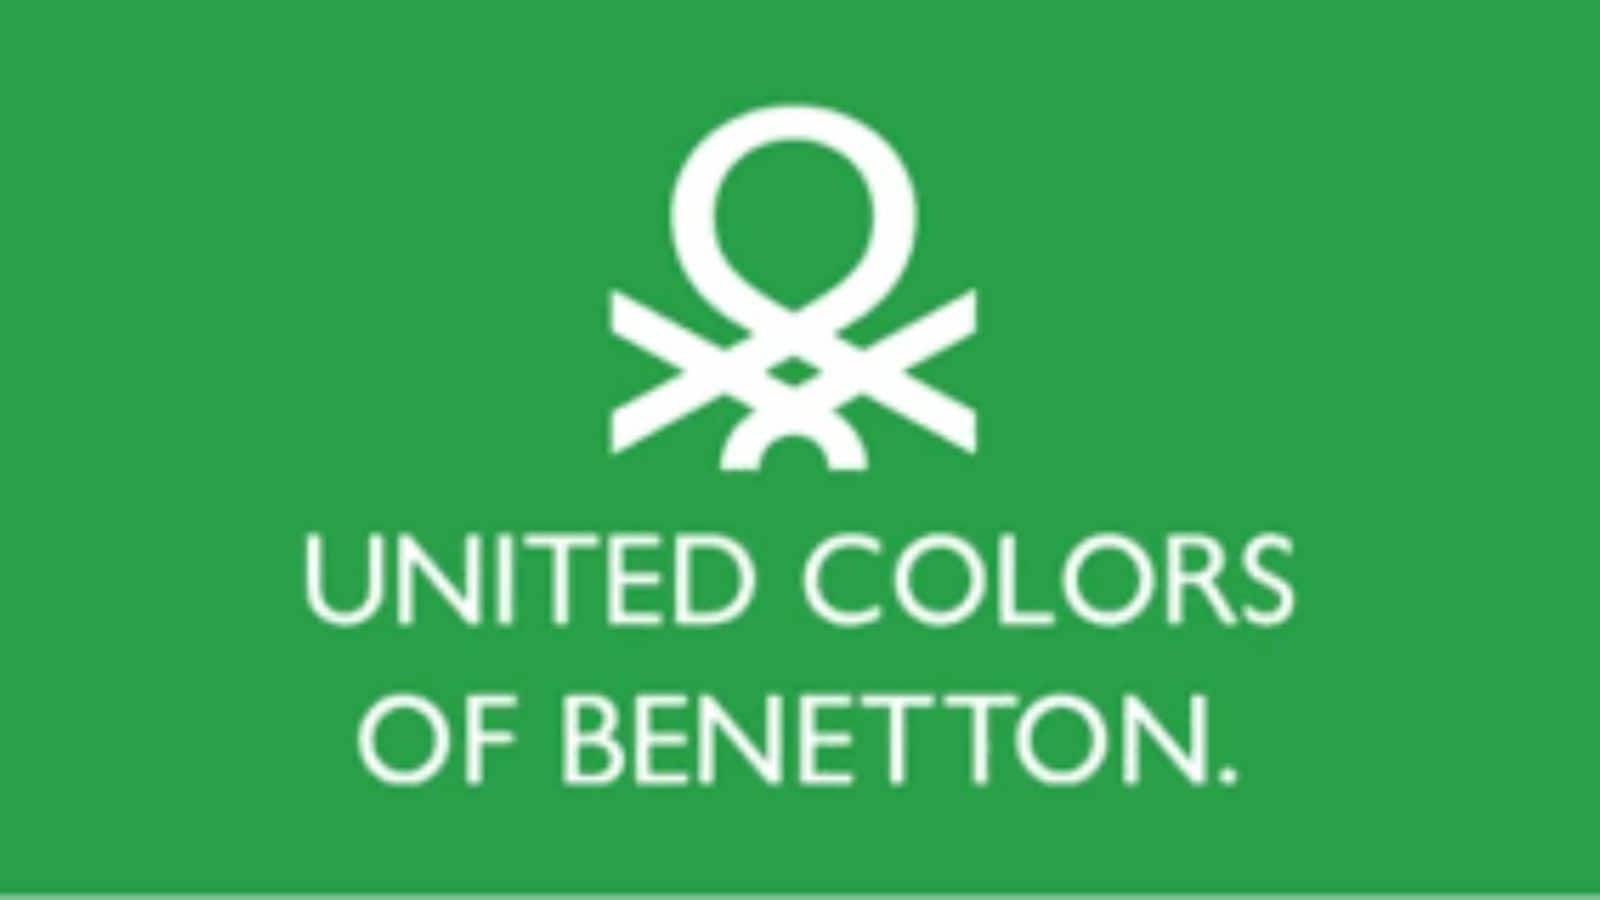 Brand Concepts Ltd. is all set to launch the new range of United Colors of  Benetton in Travel Gear, Handbags, Small Leather Goods & Accessories